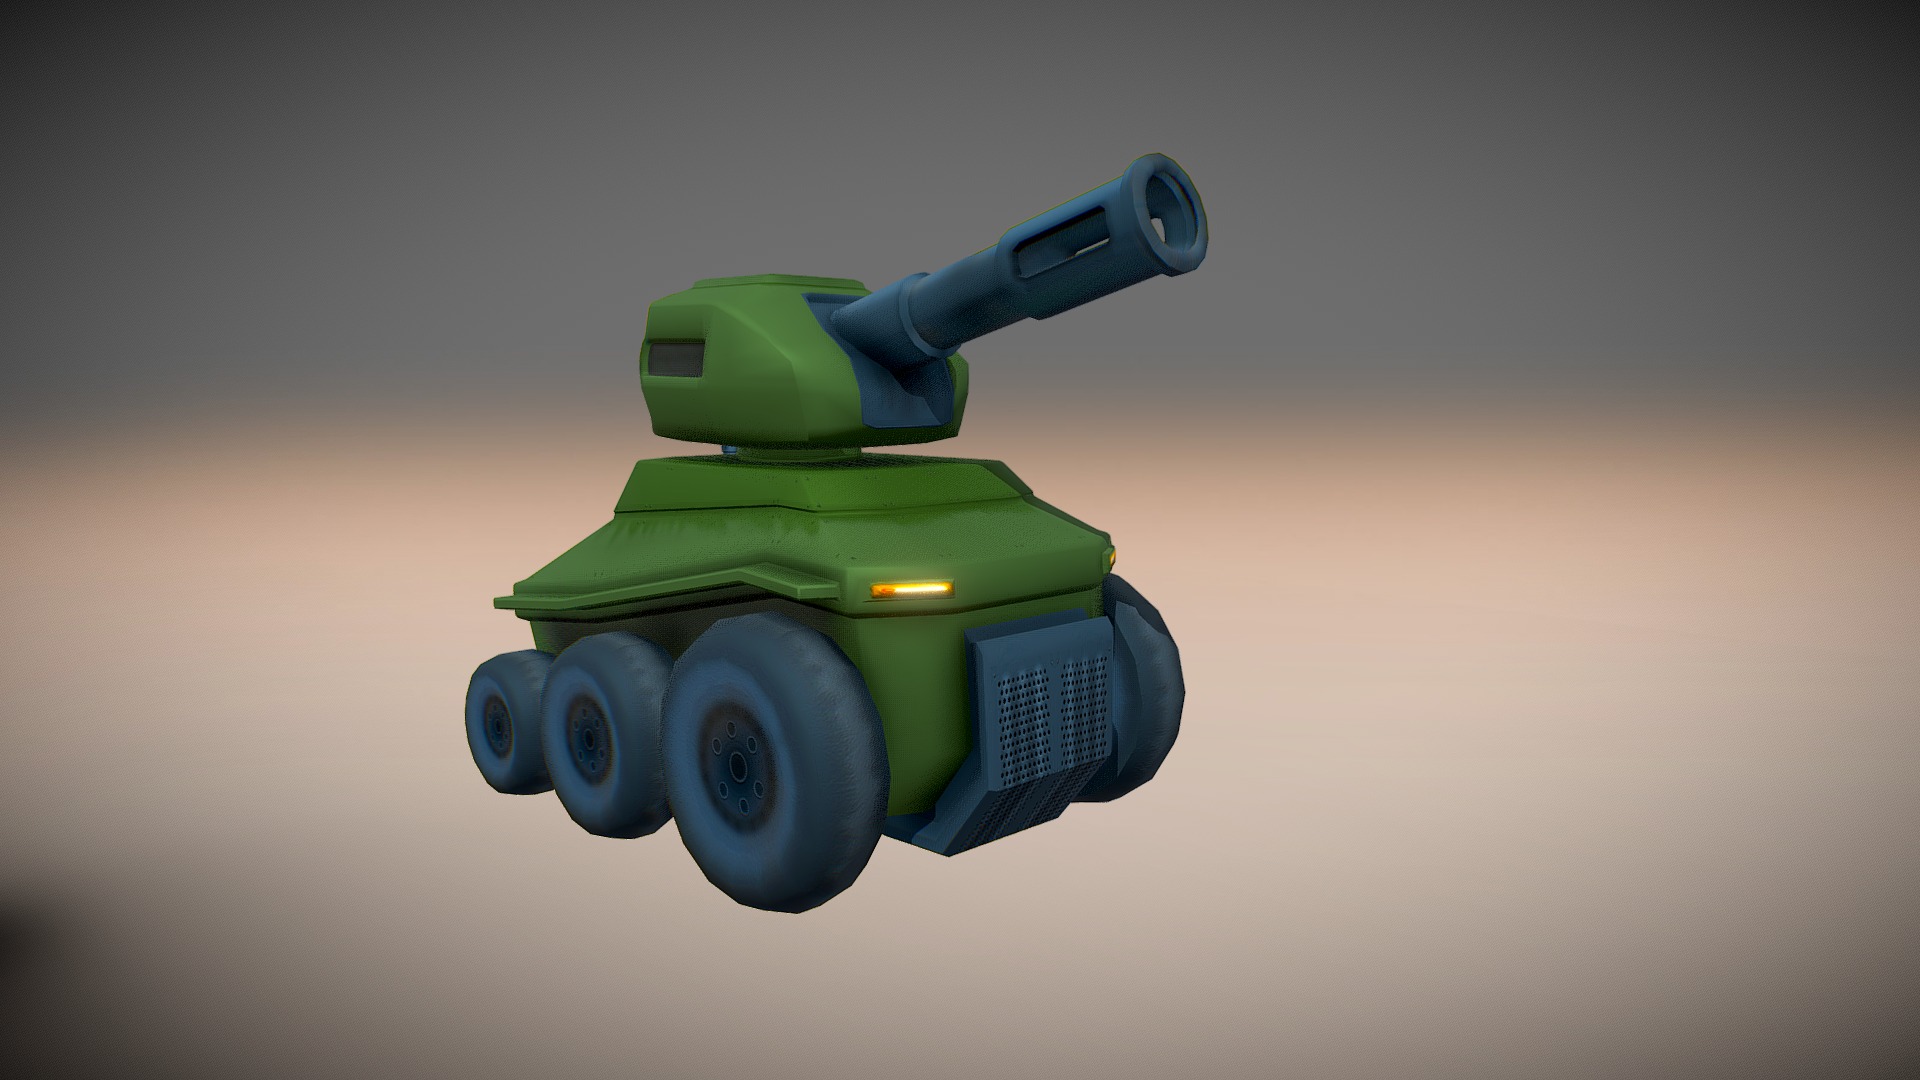 3D model Fortnite Style Asset – Tank - This is a 3D model of the Fortnite Style Asset - Tank. The 3D model is about a toy green and blue toy vehicle.